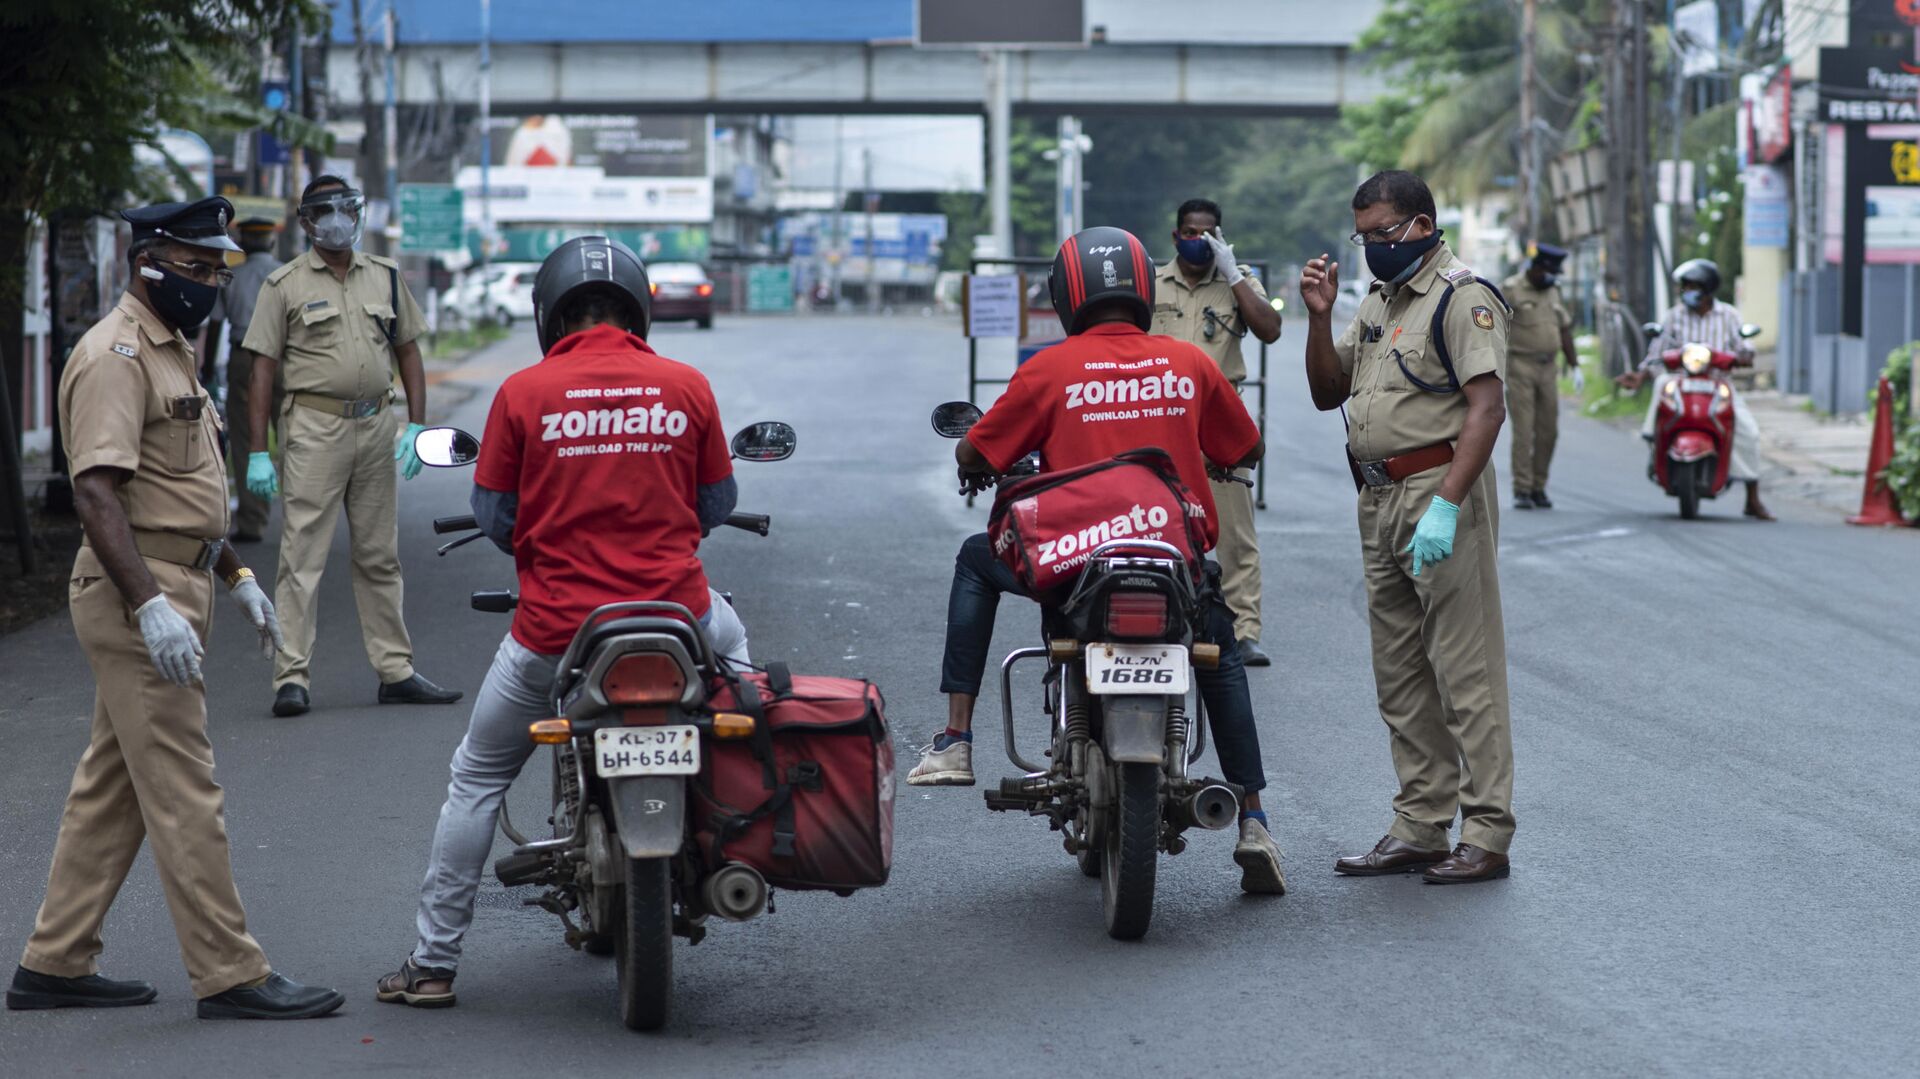 Policemen check the credentials of food delivery personnel during a lockdown imposed to curb the spread of coronavirus in Kochi, Kerala state, India, Saturday, May 8, 2021 - Sputnik International, 1920, 07.09.2021